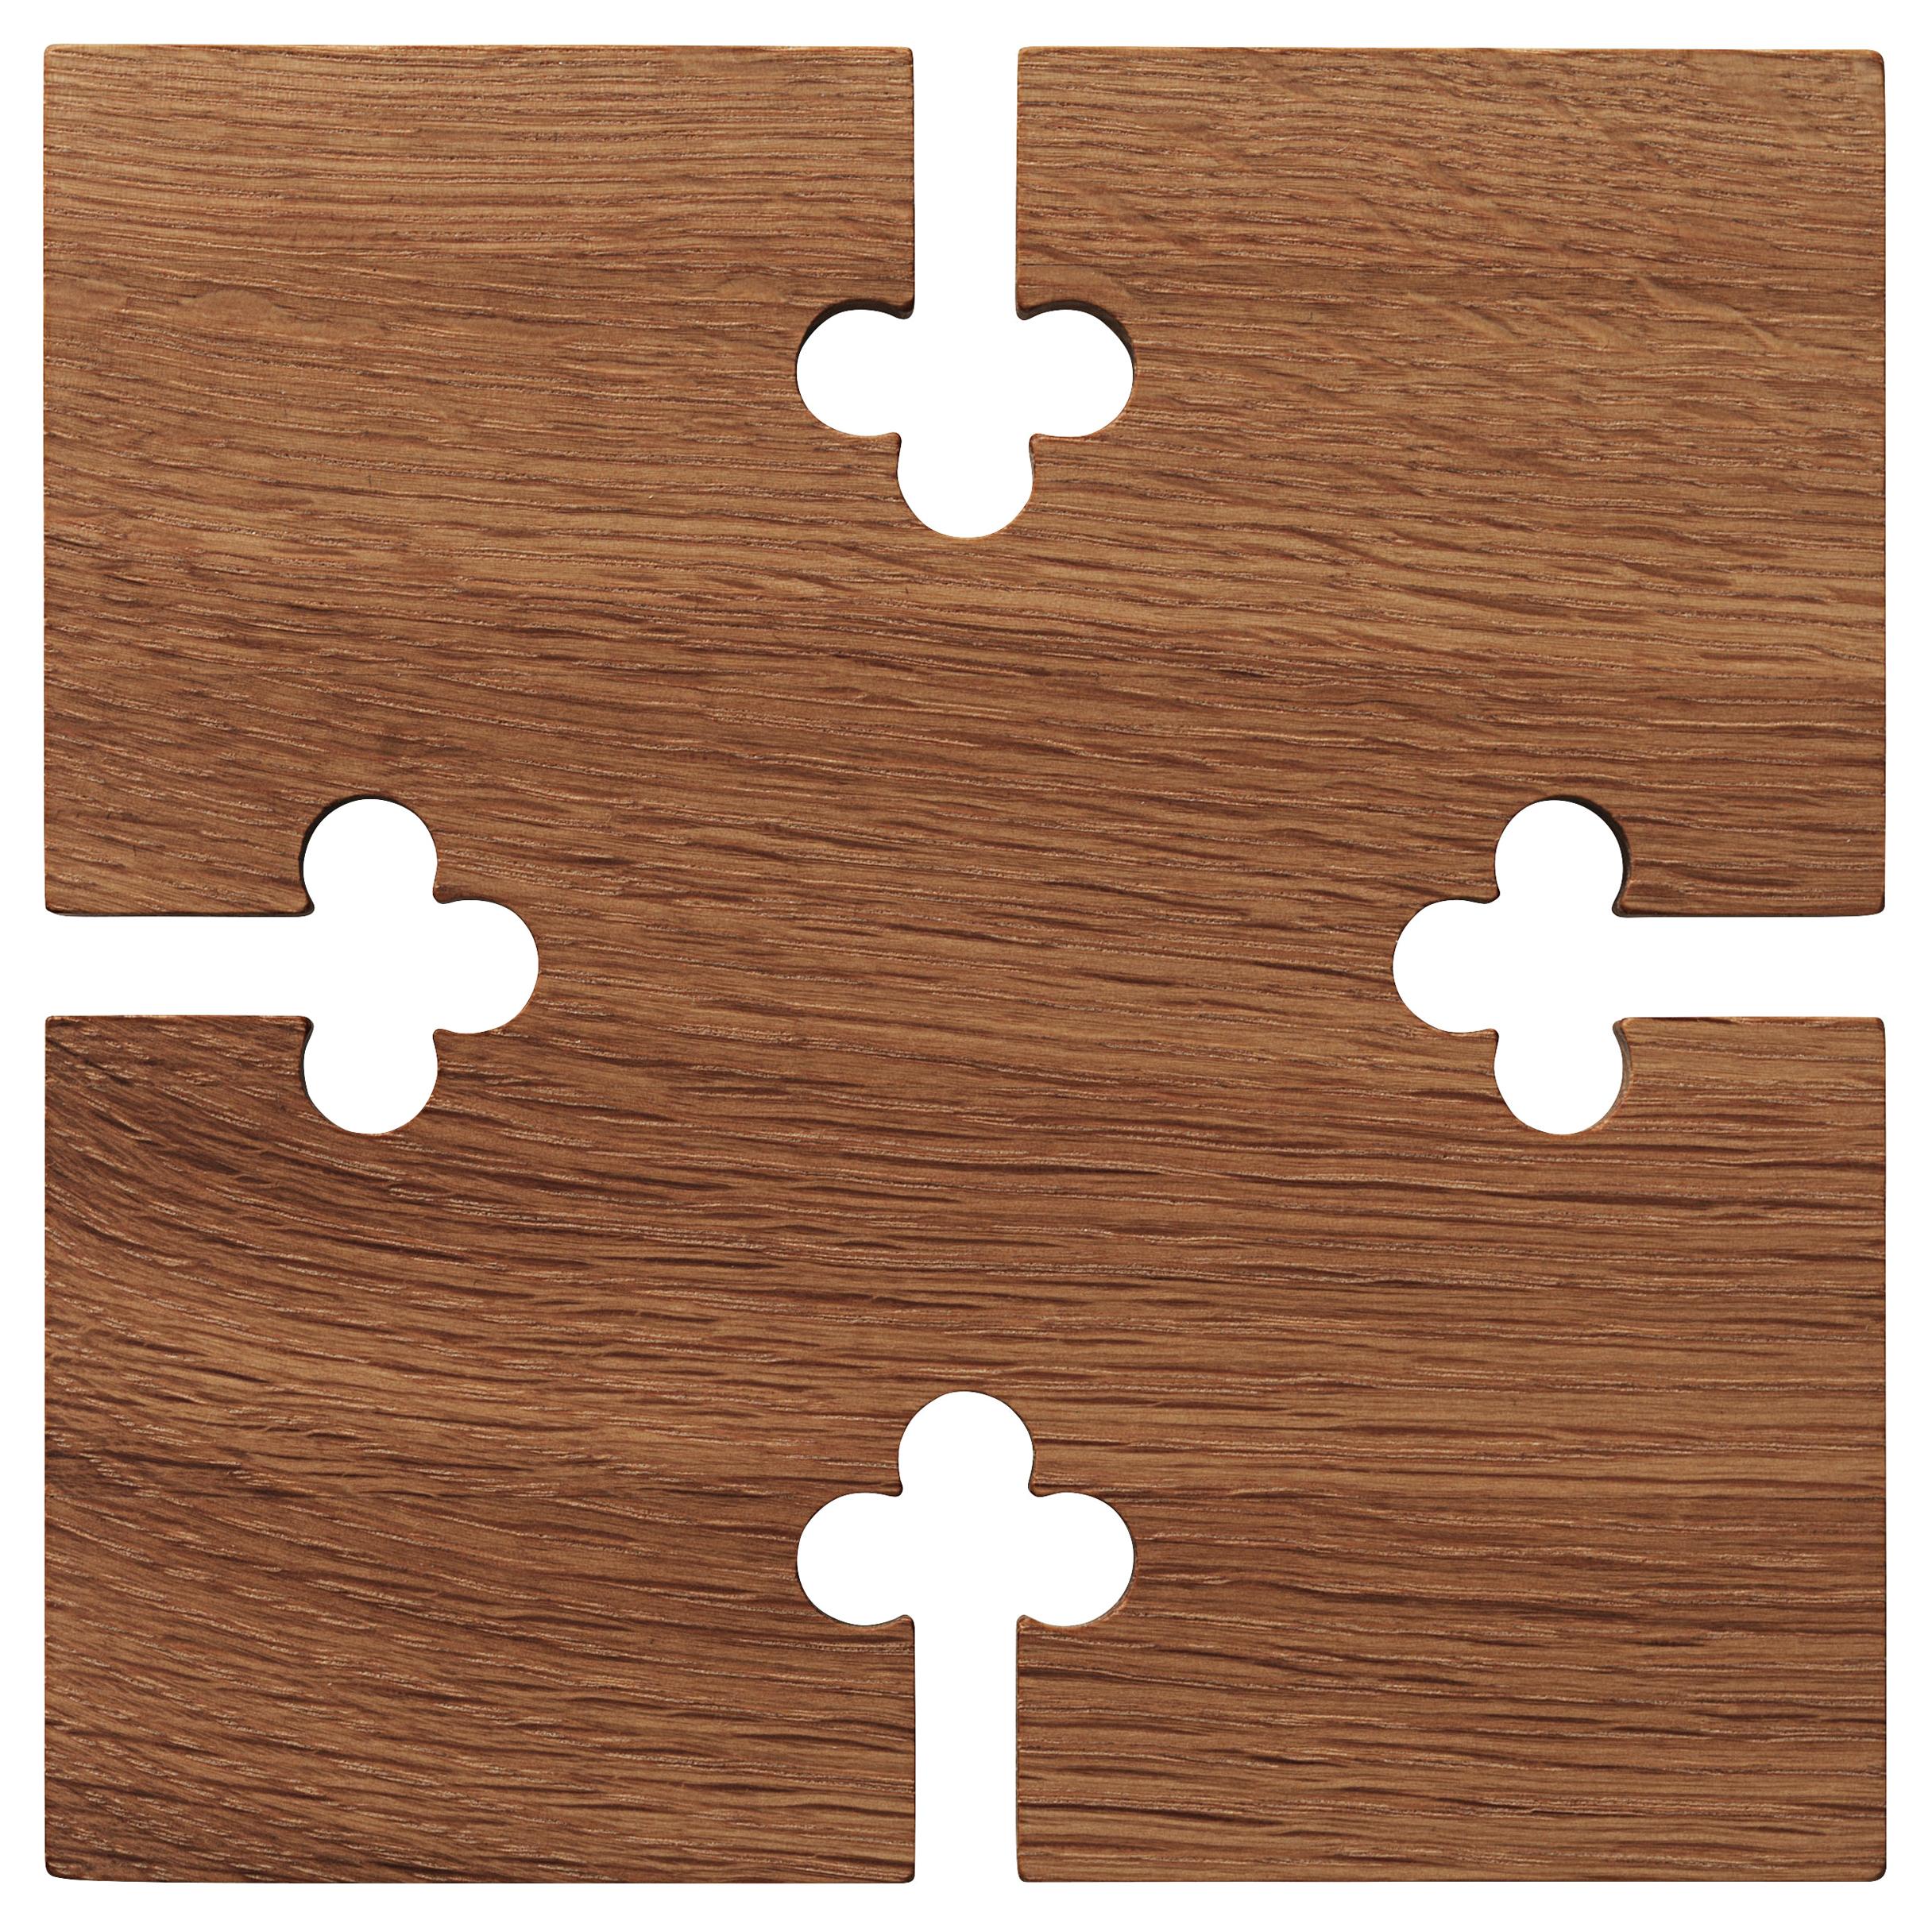 Gourmet Square Wood Trivet, by Gunnar Cyren from Warm Nordic